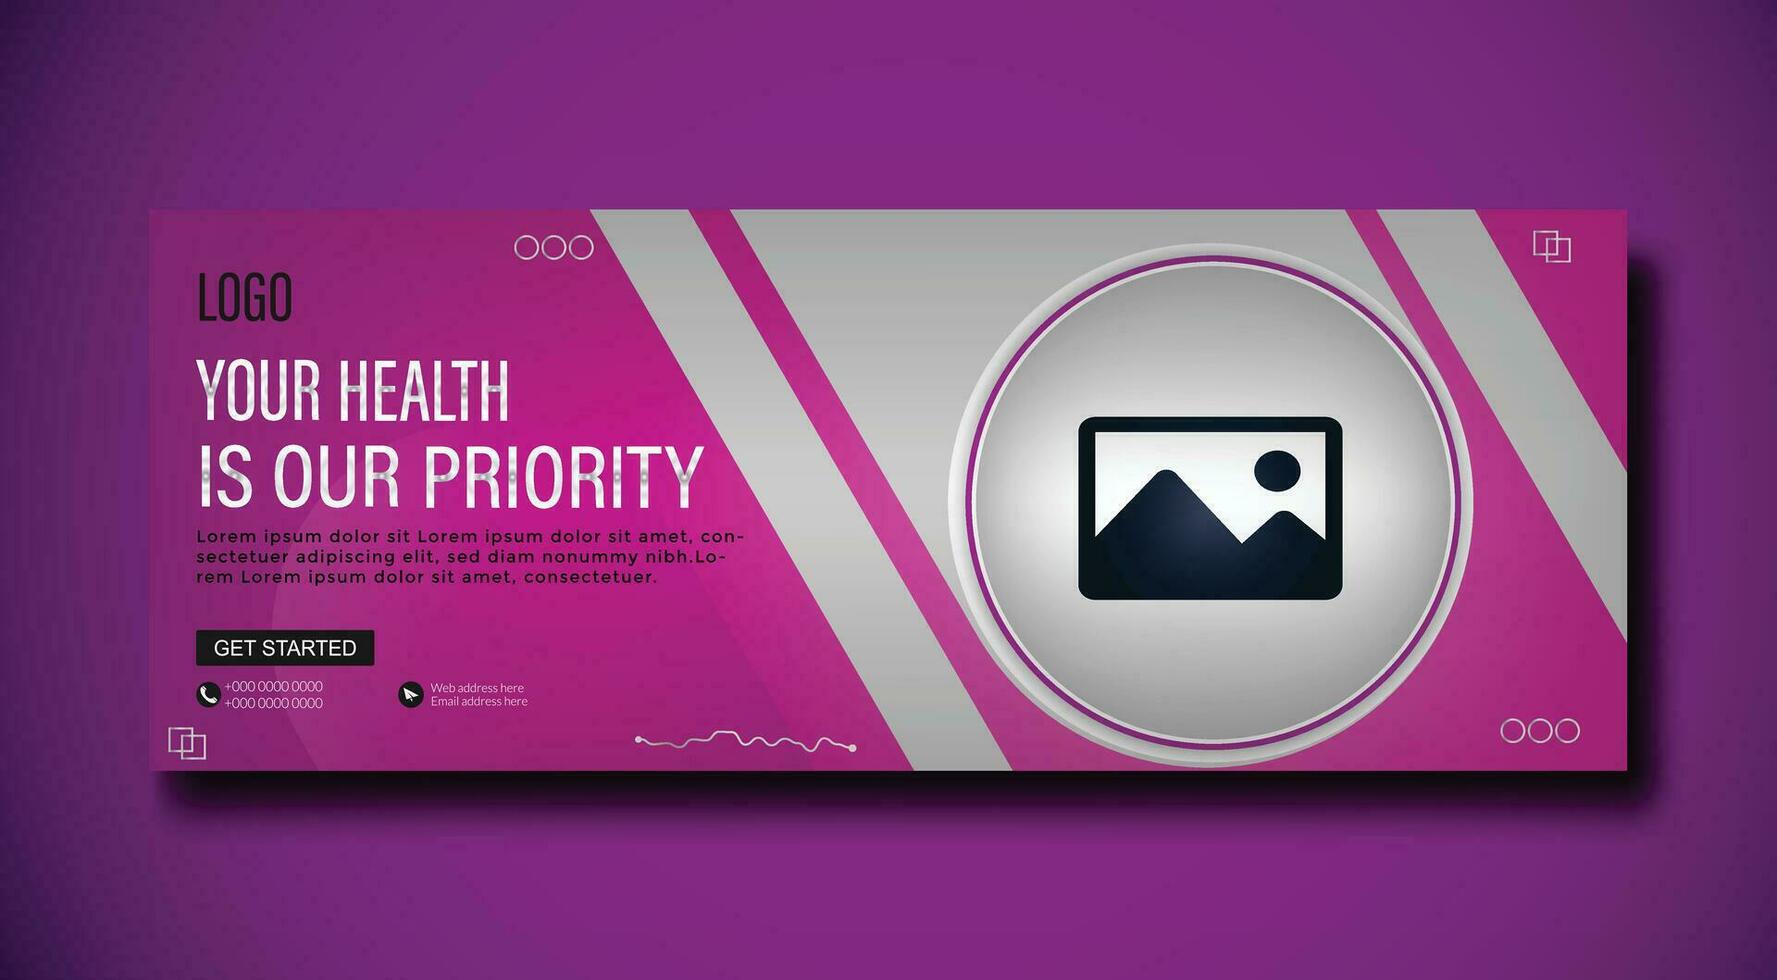 Medical health care cover and banner template vector design